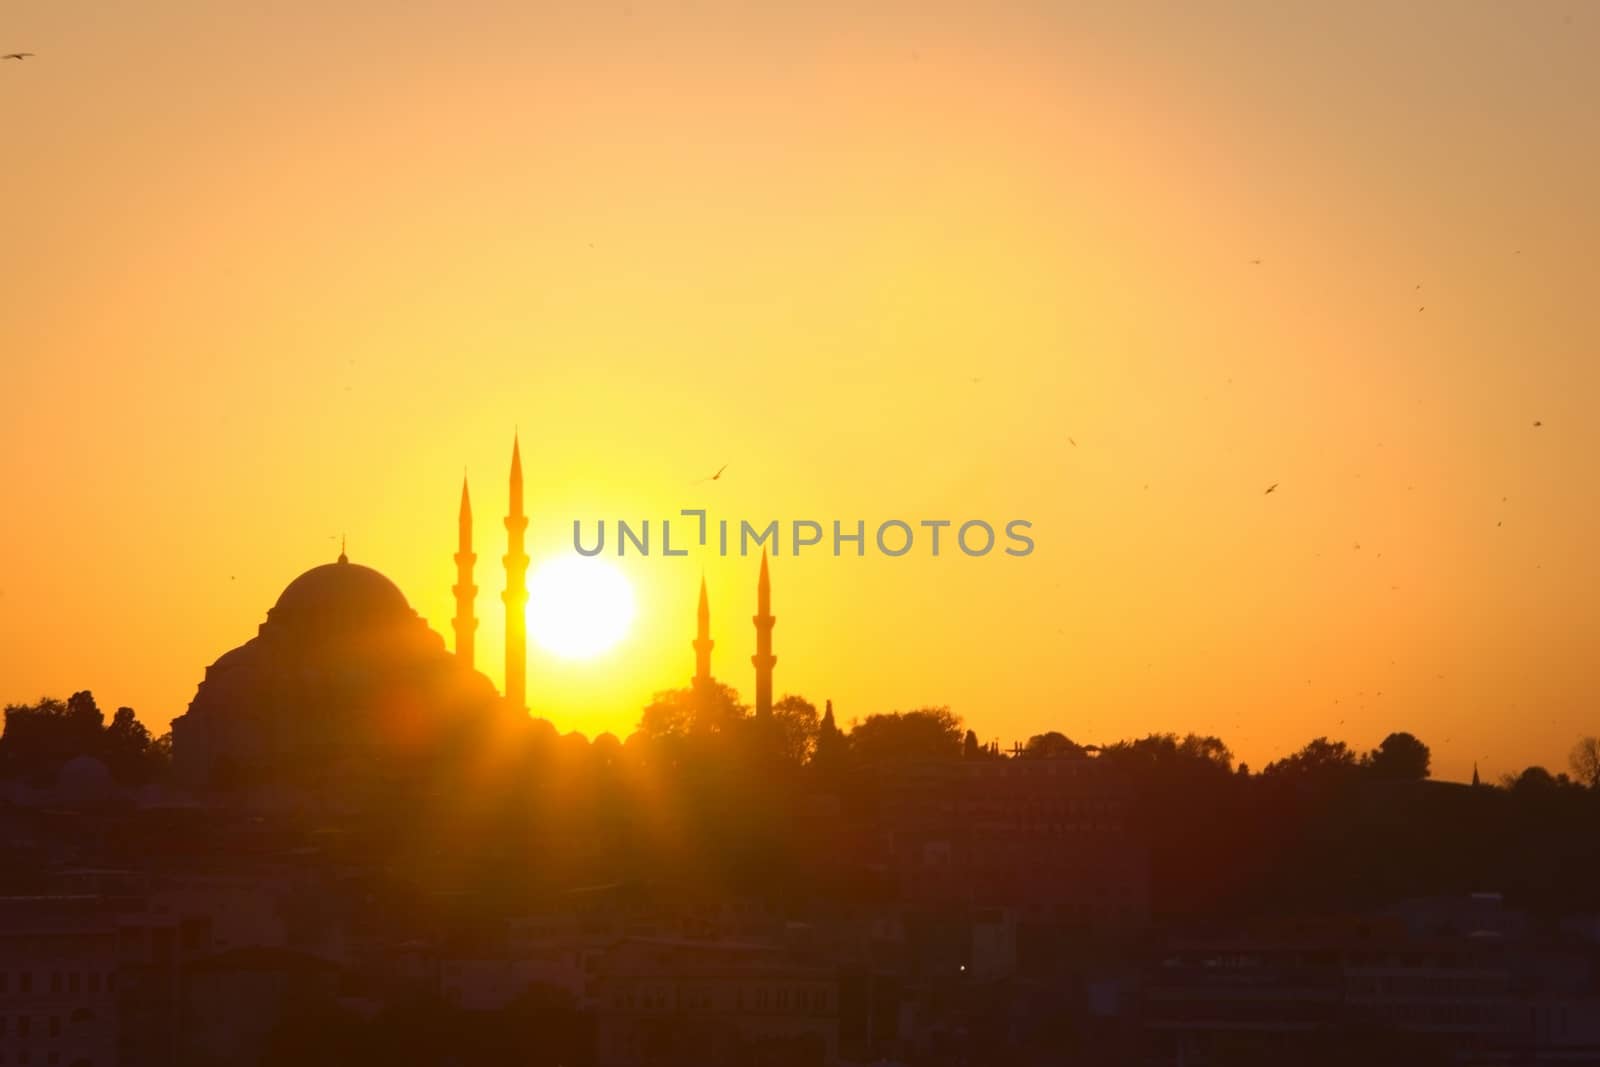 Hagia Sophia, the most important tourist attraction of Istanbul, Turkey, silhouetted against the bright sunset sky.